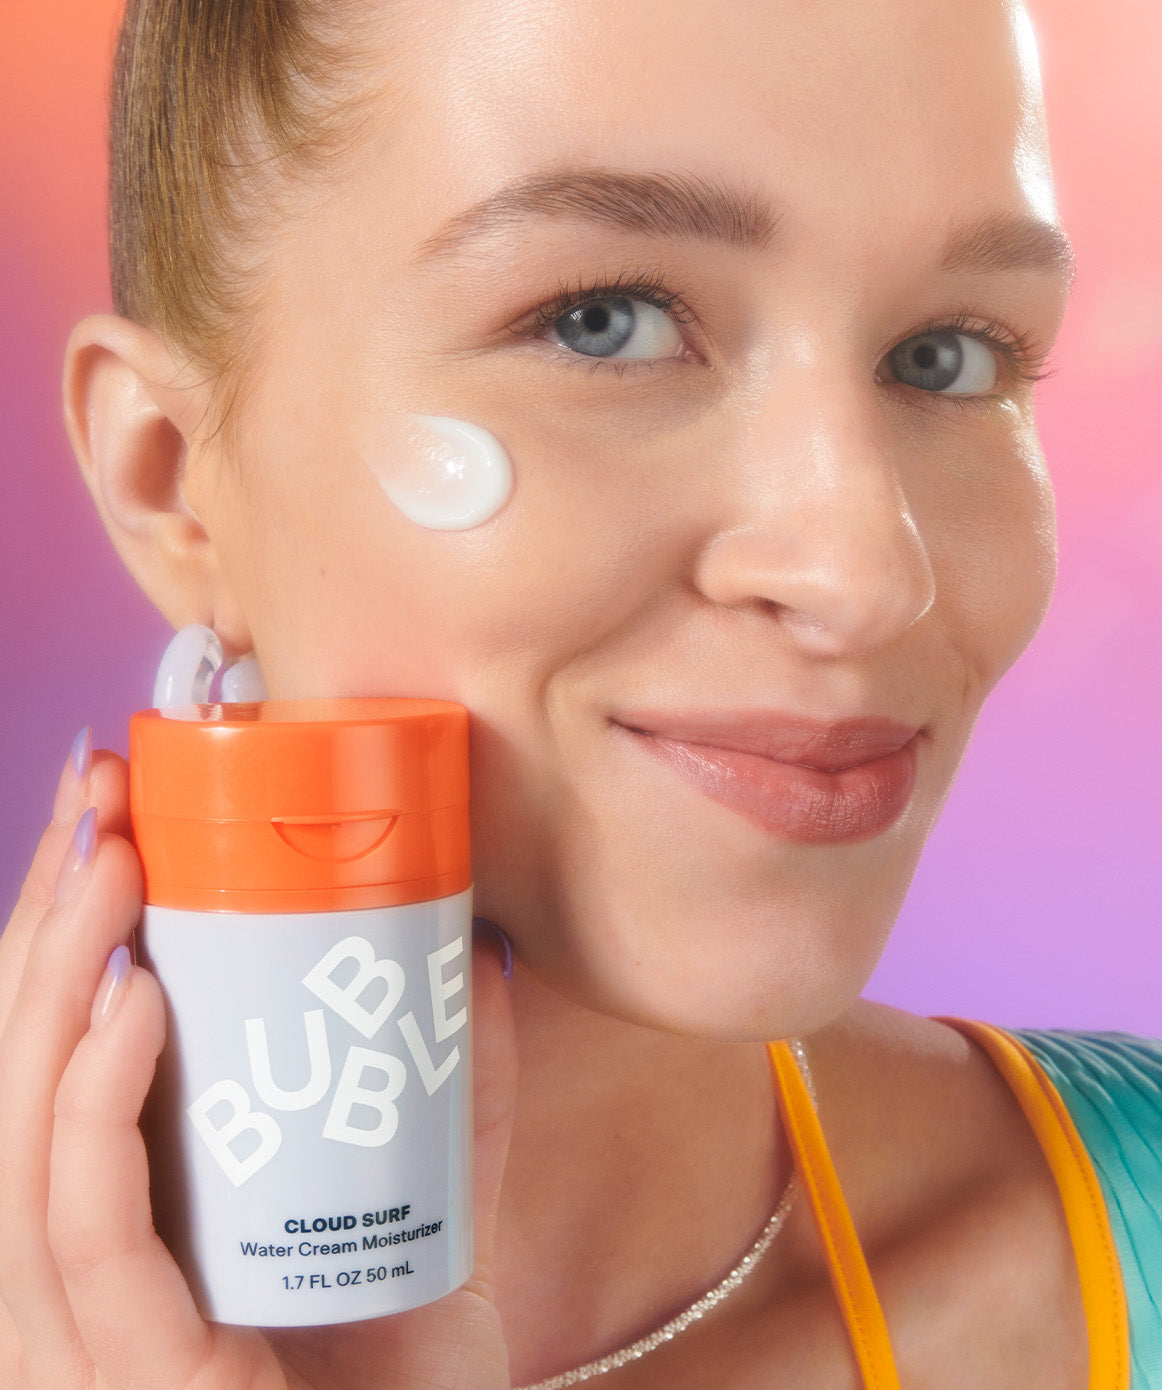 Brighten Up Your Morning With Viral Beauty Brand Bubble's New Eye